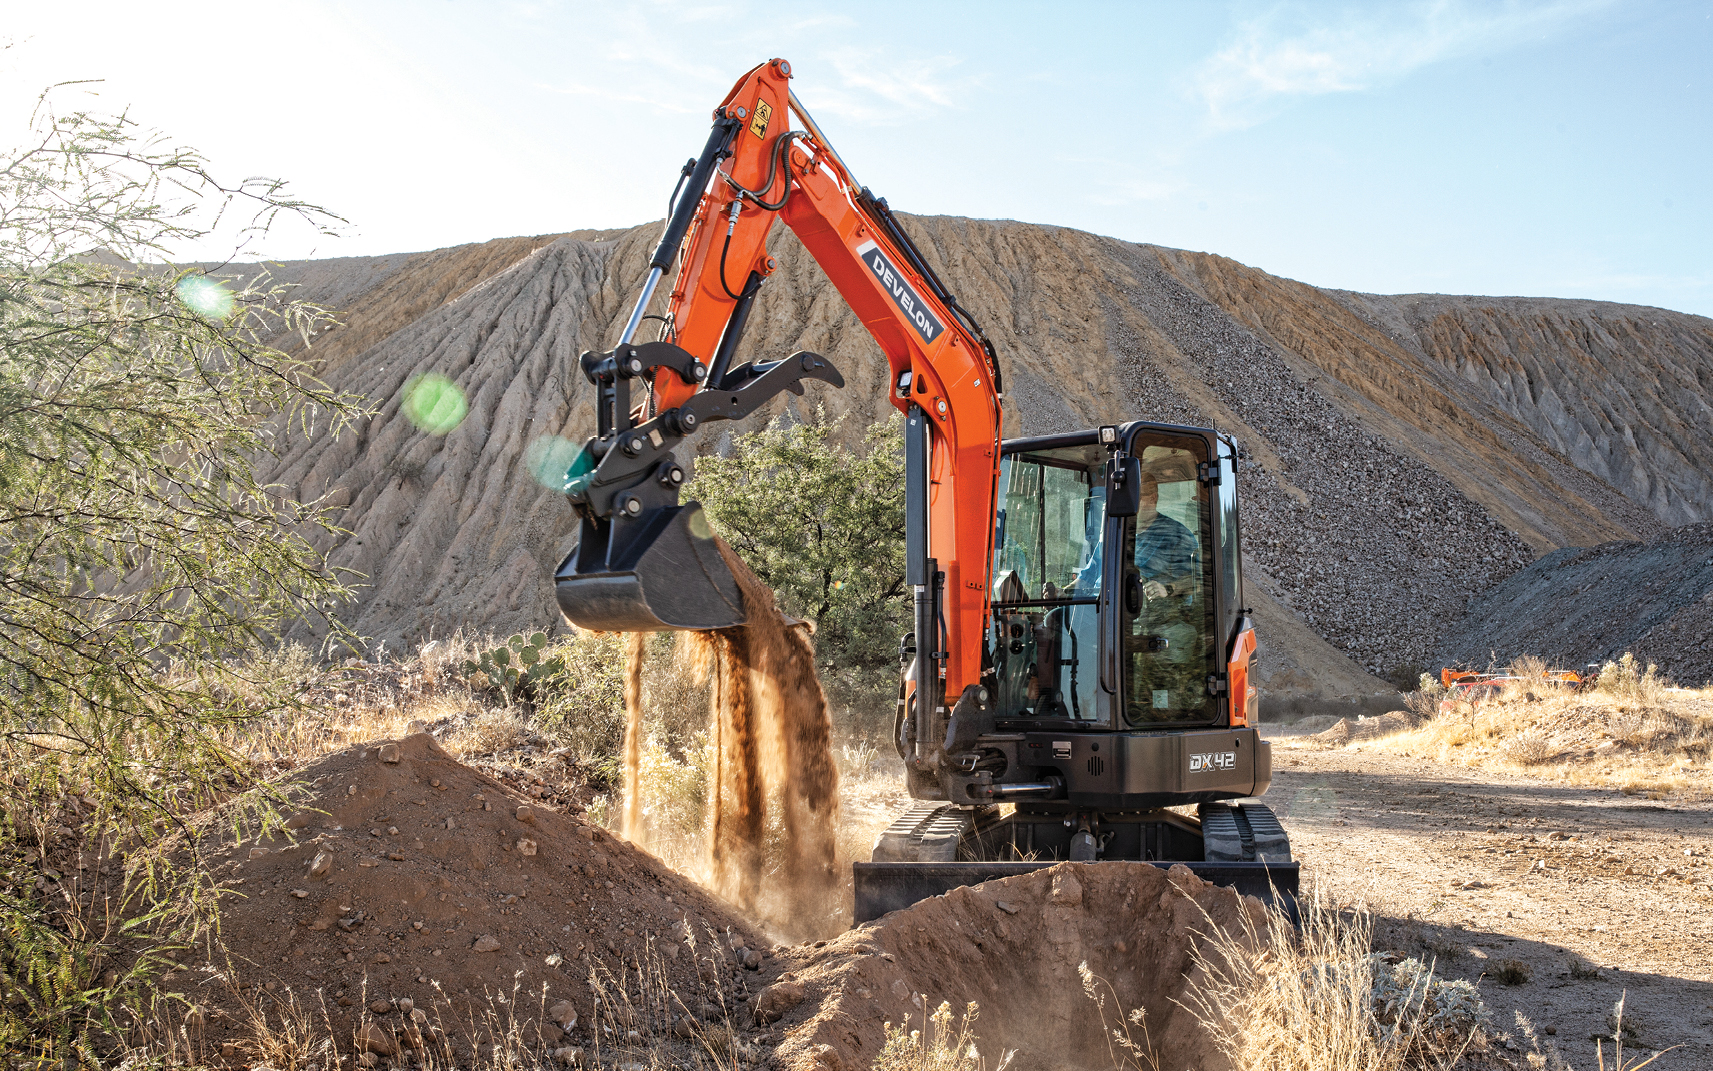 A DX42-7 mini excavator dumping dirt from a bucket.